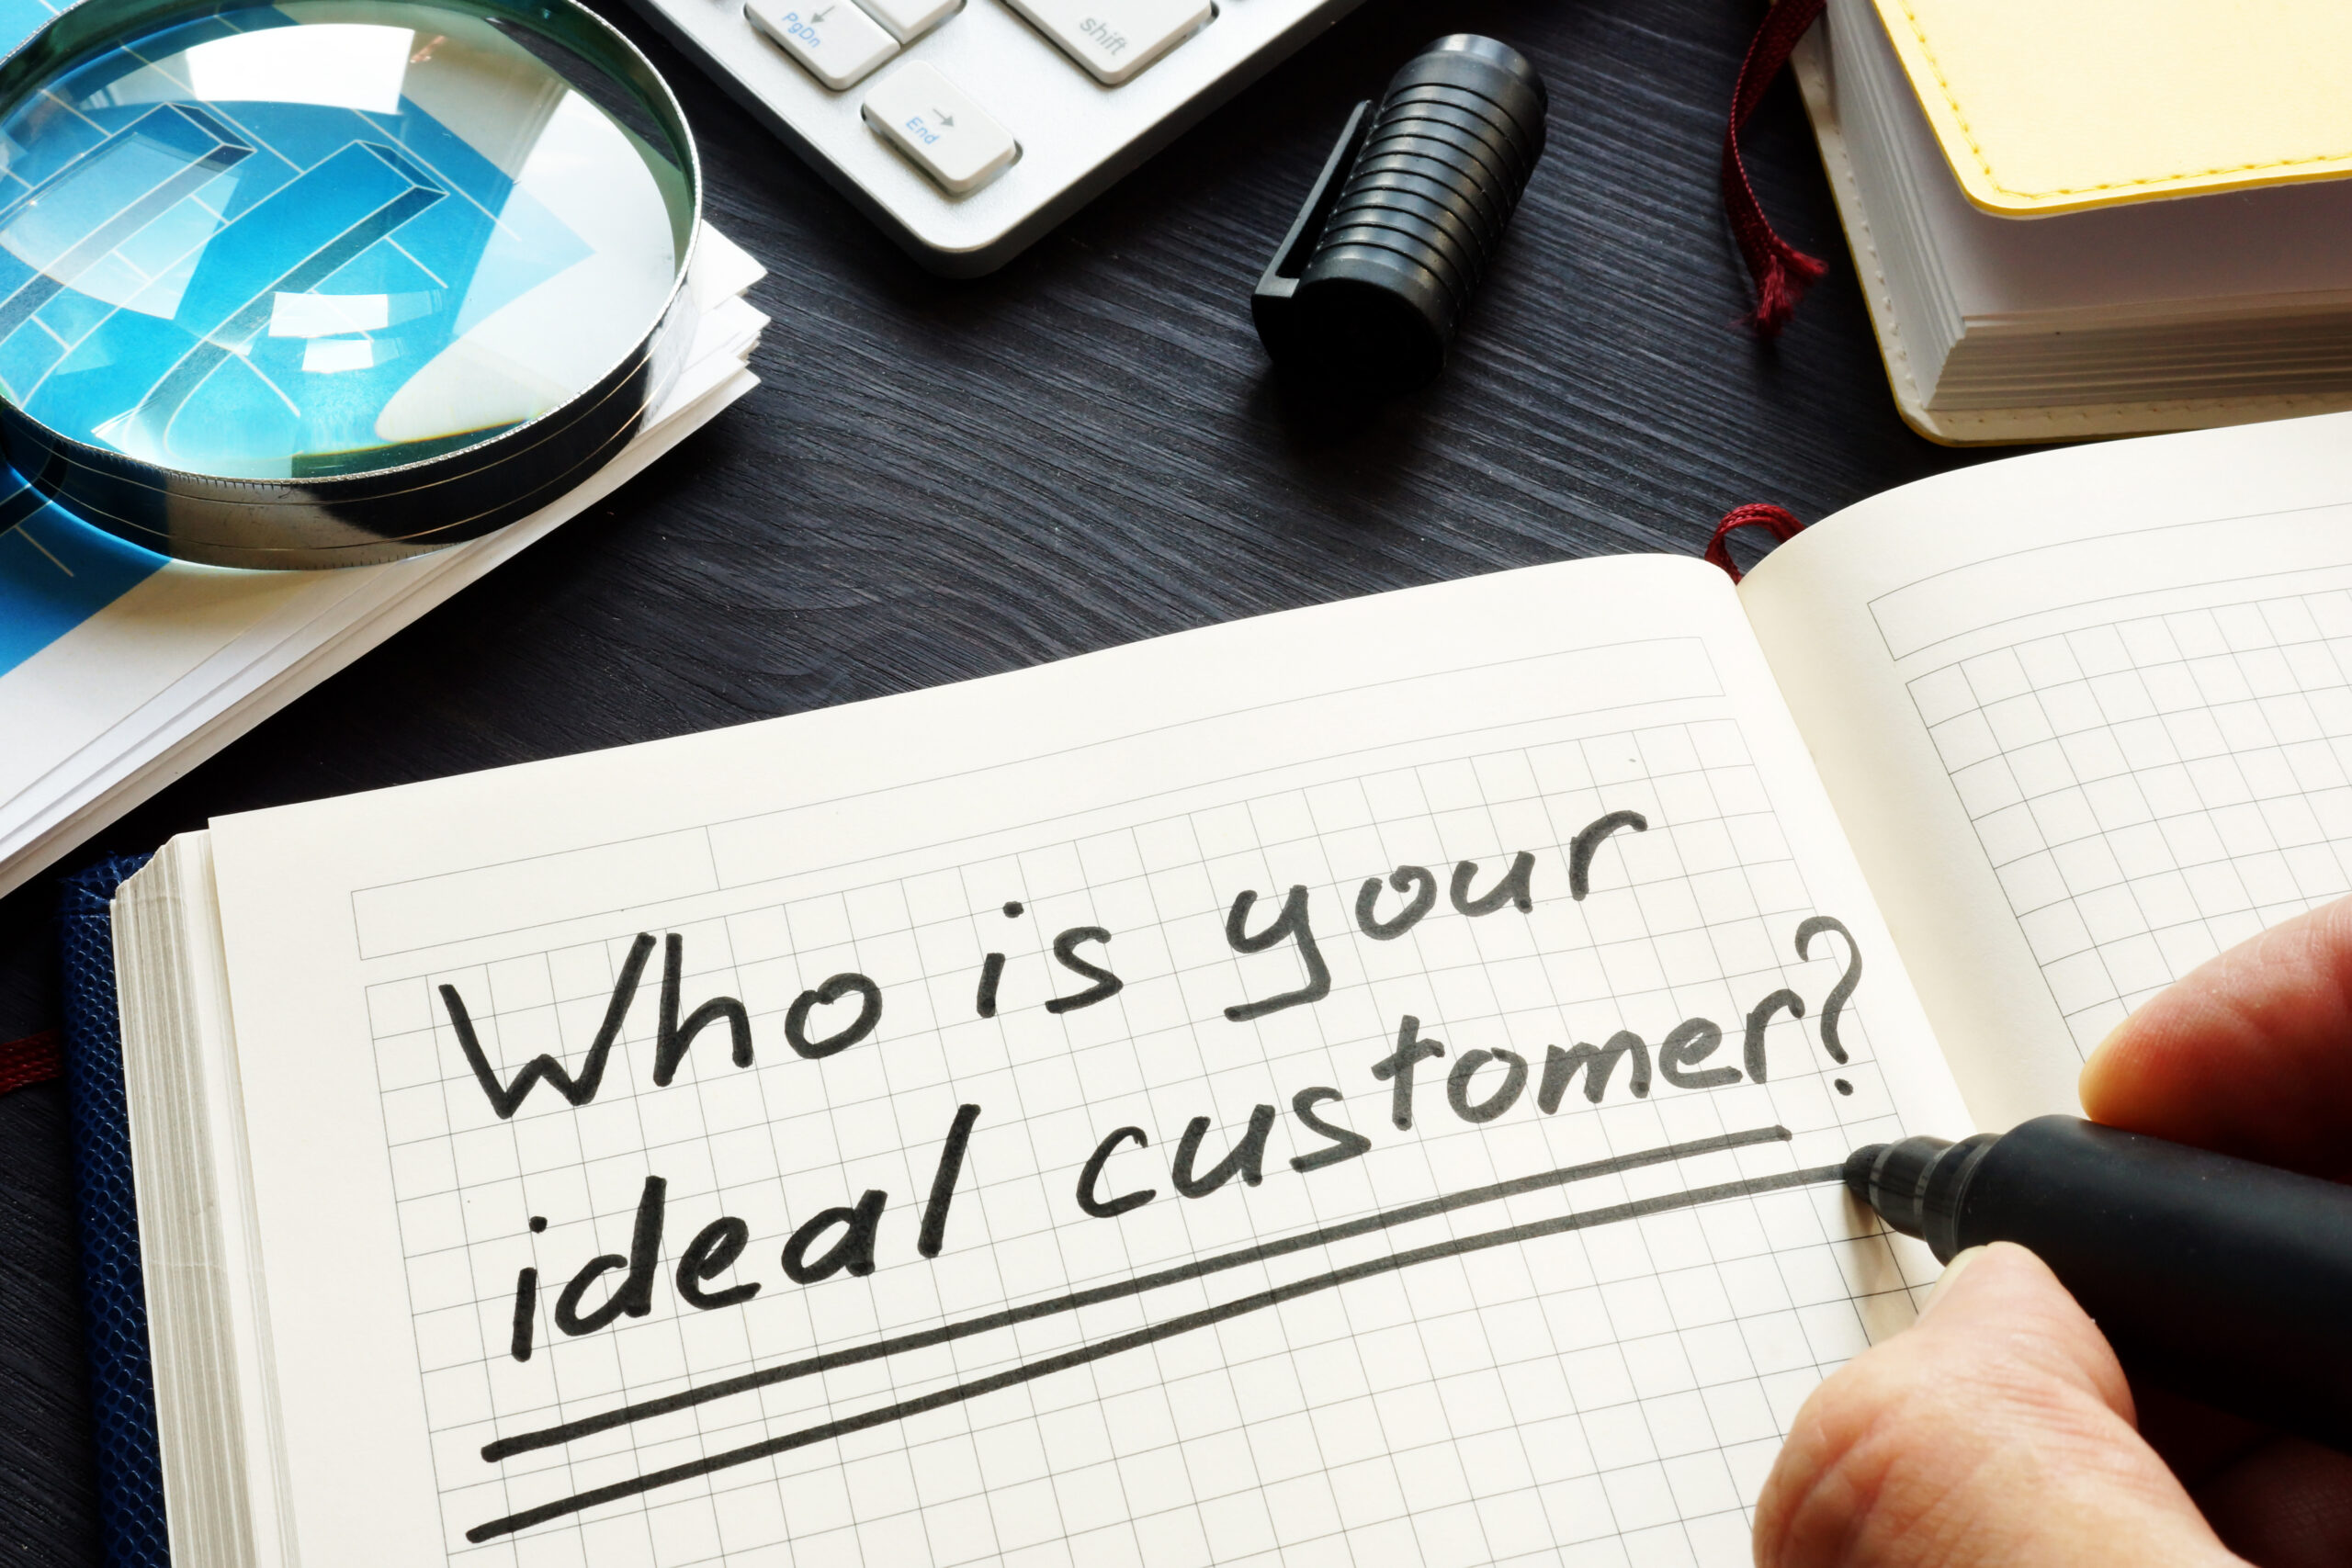 "Who is your ideal customer?" is written in a journal. The author's hand is shown holding a black marker.